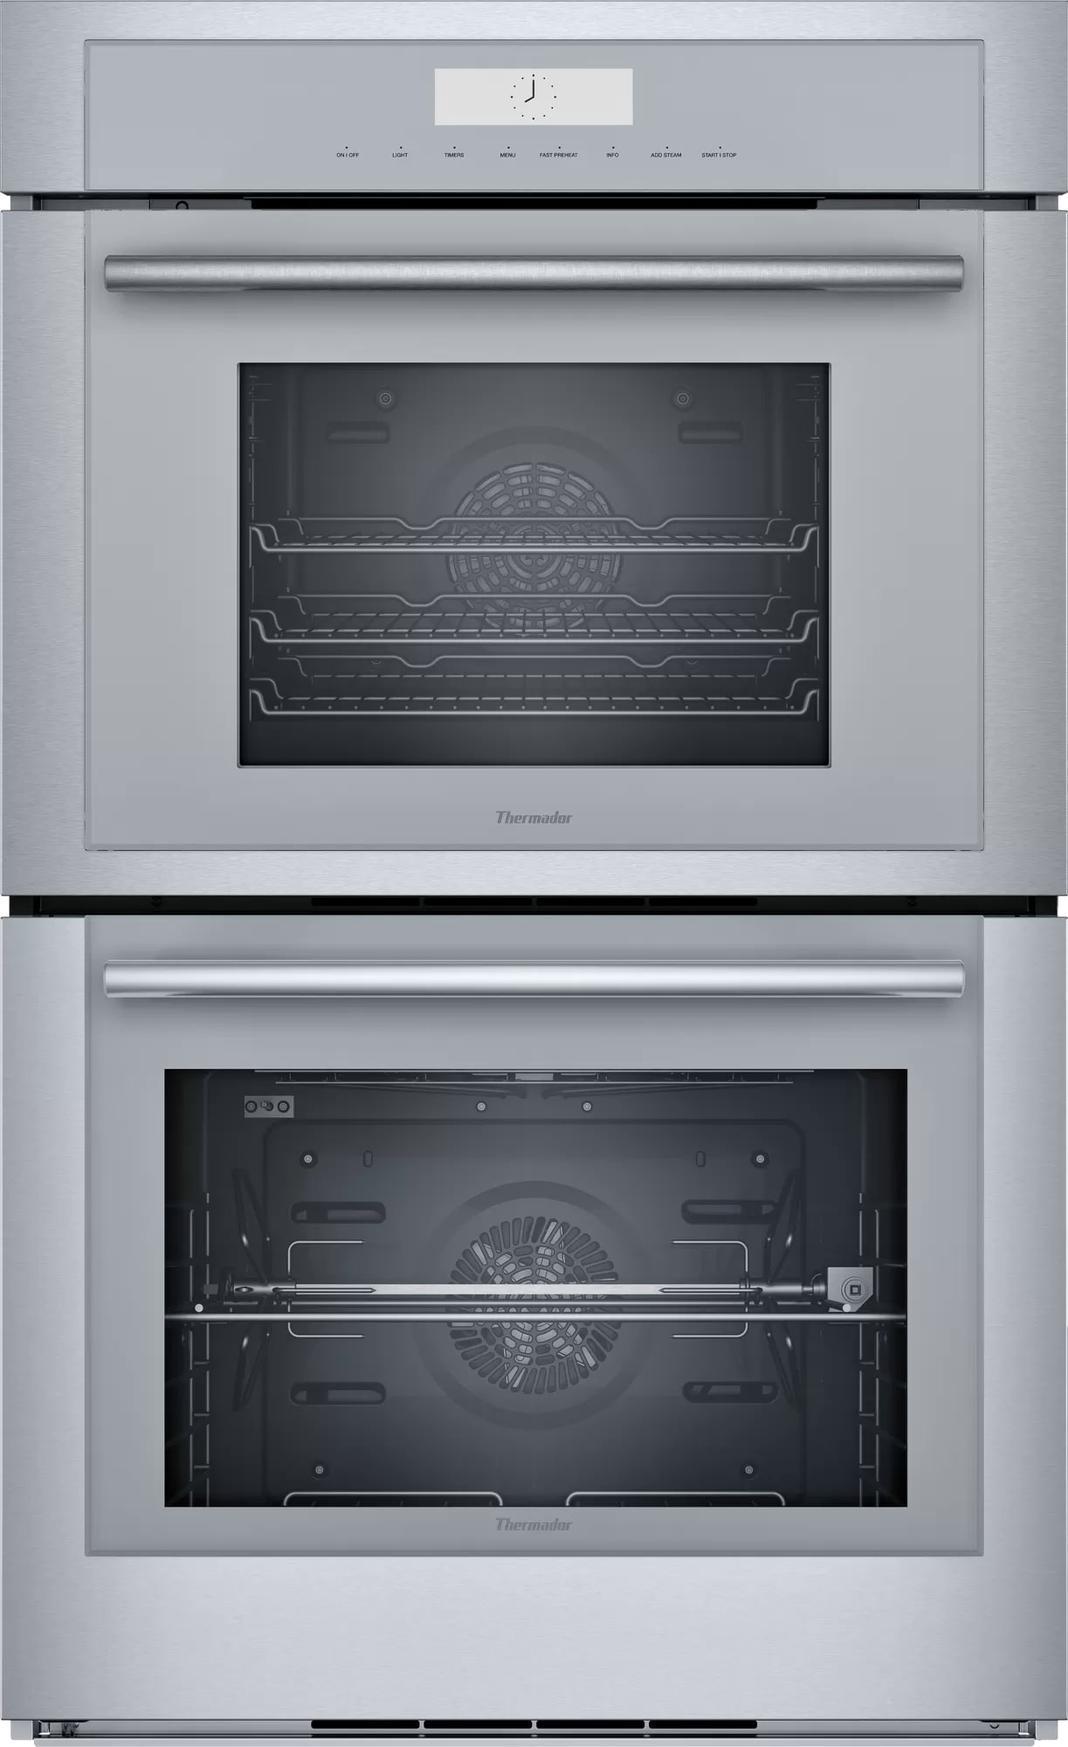 Thermador - 7.3 cu. ft Double Wall Oven in Stainless - MEDS302WS